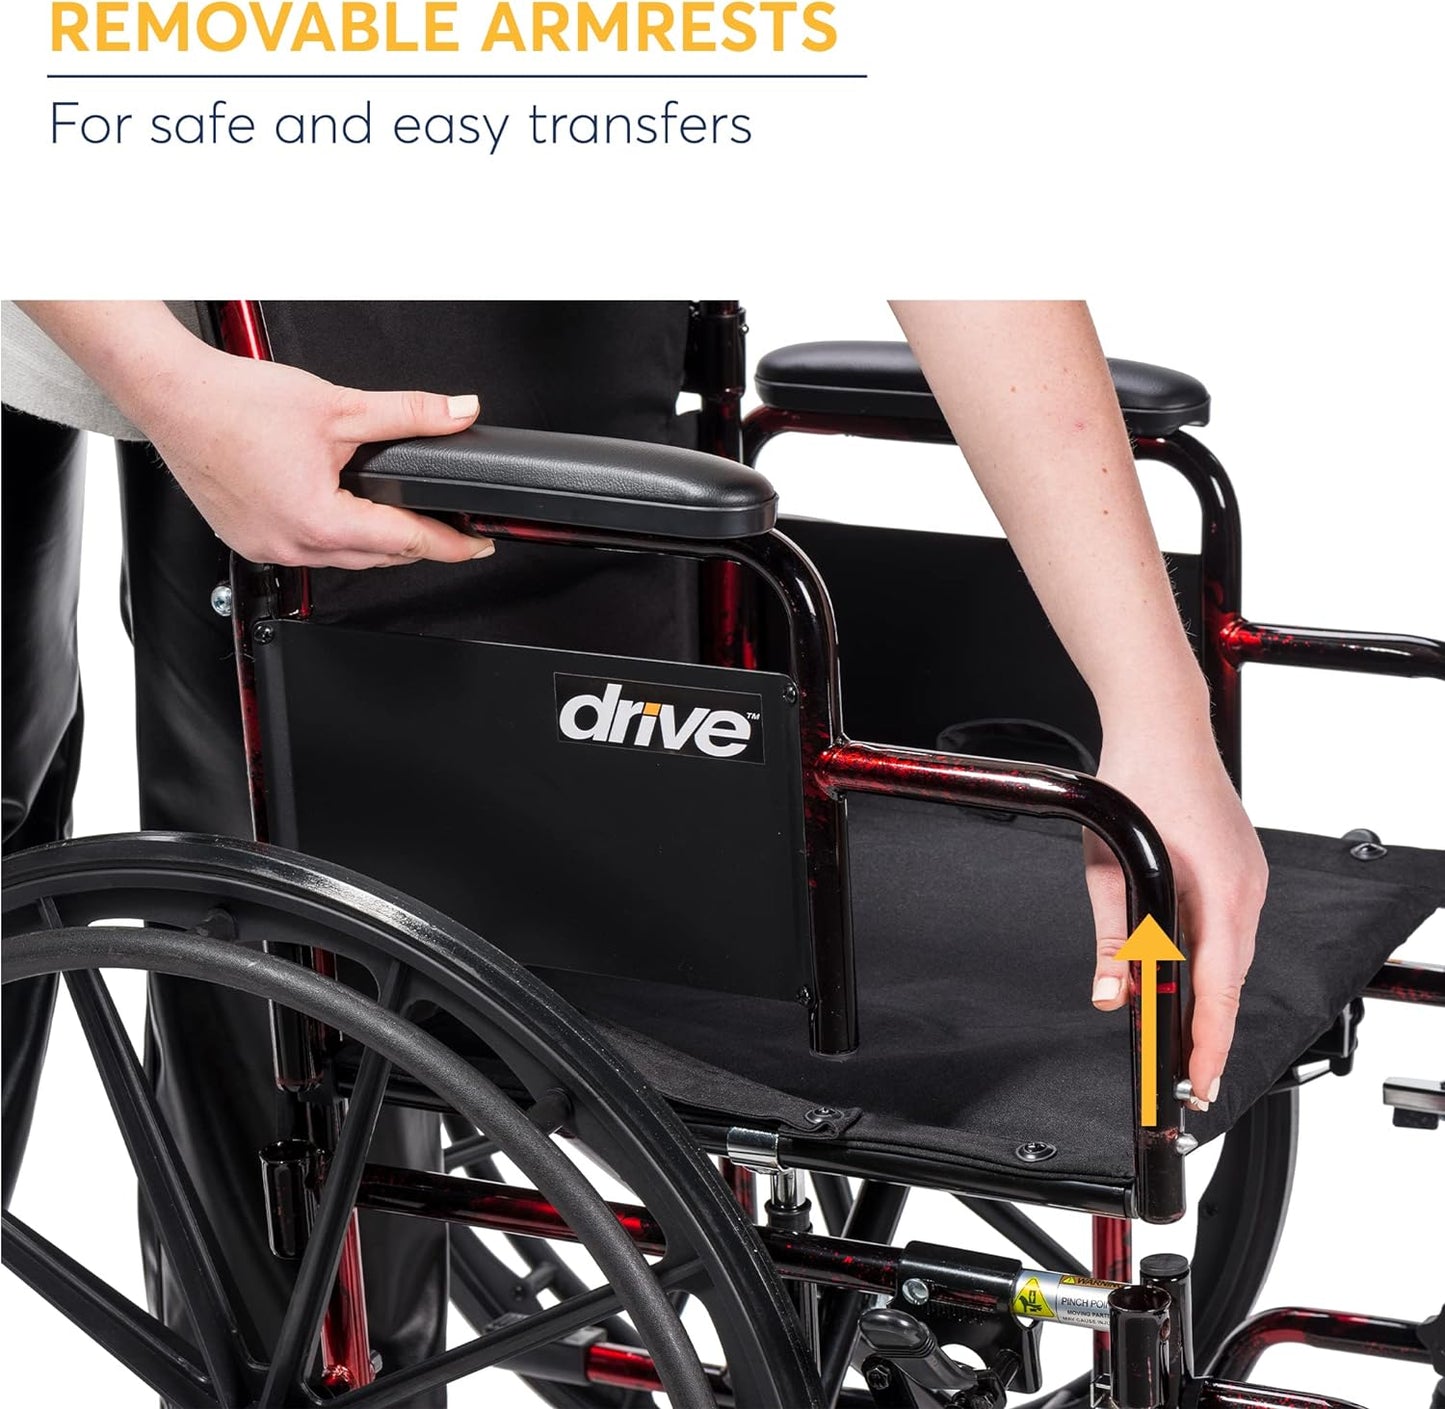 NEW - Drive Medical RTLREB18DDA-SF Rebel Lightweight Wheelchair with Swing-Away Footrest, Red - Retail $155